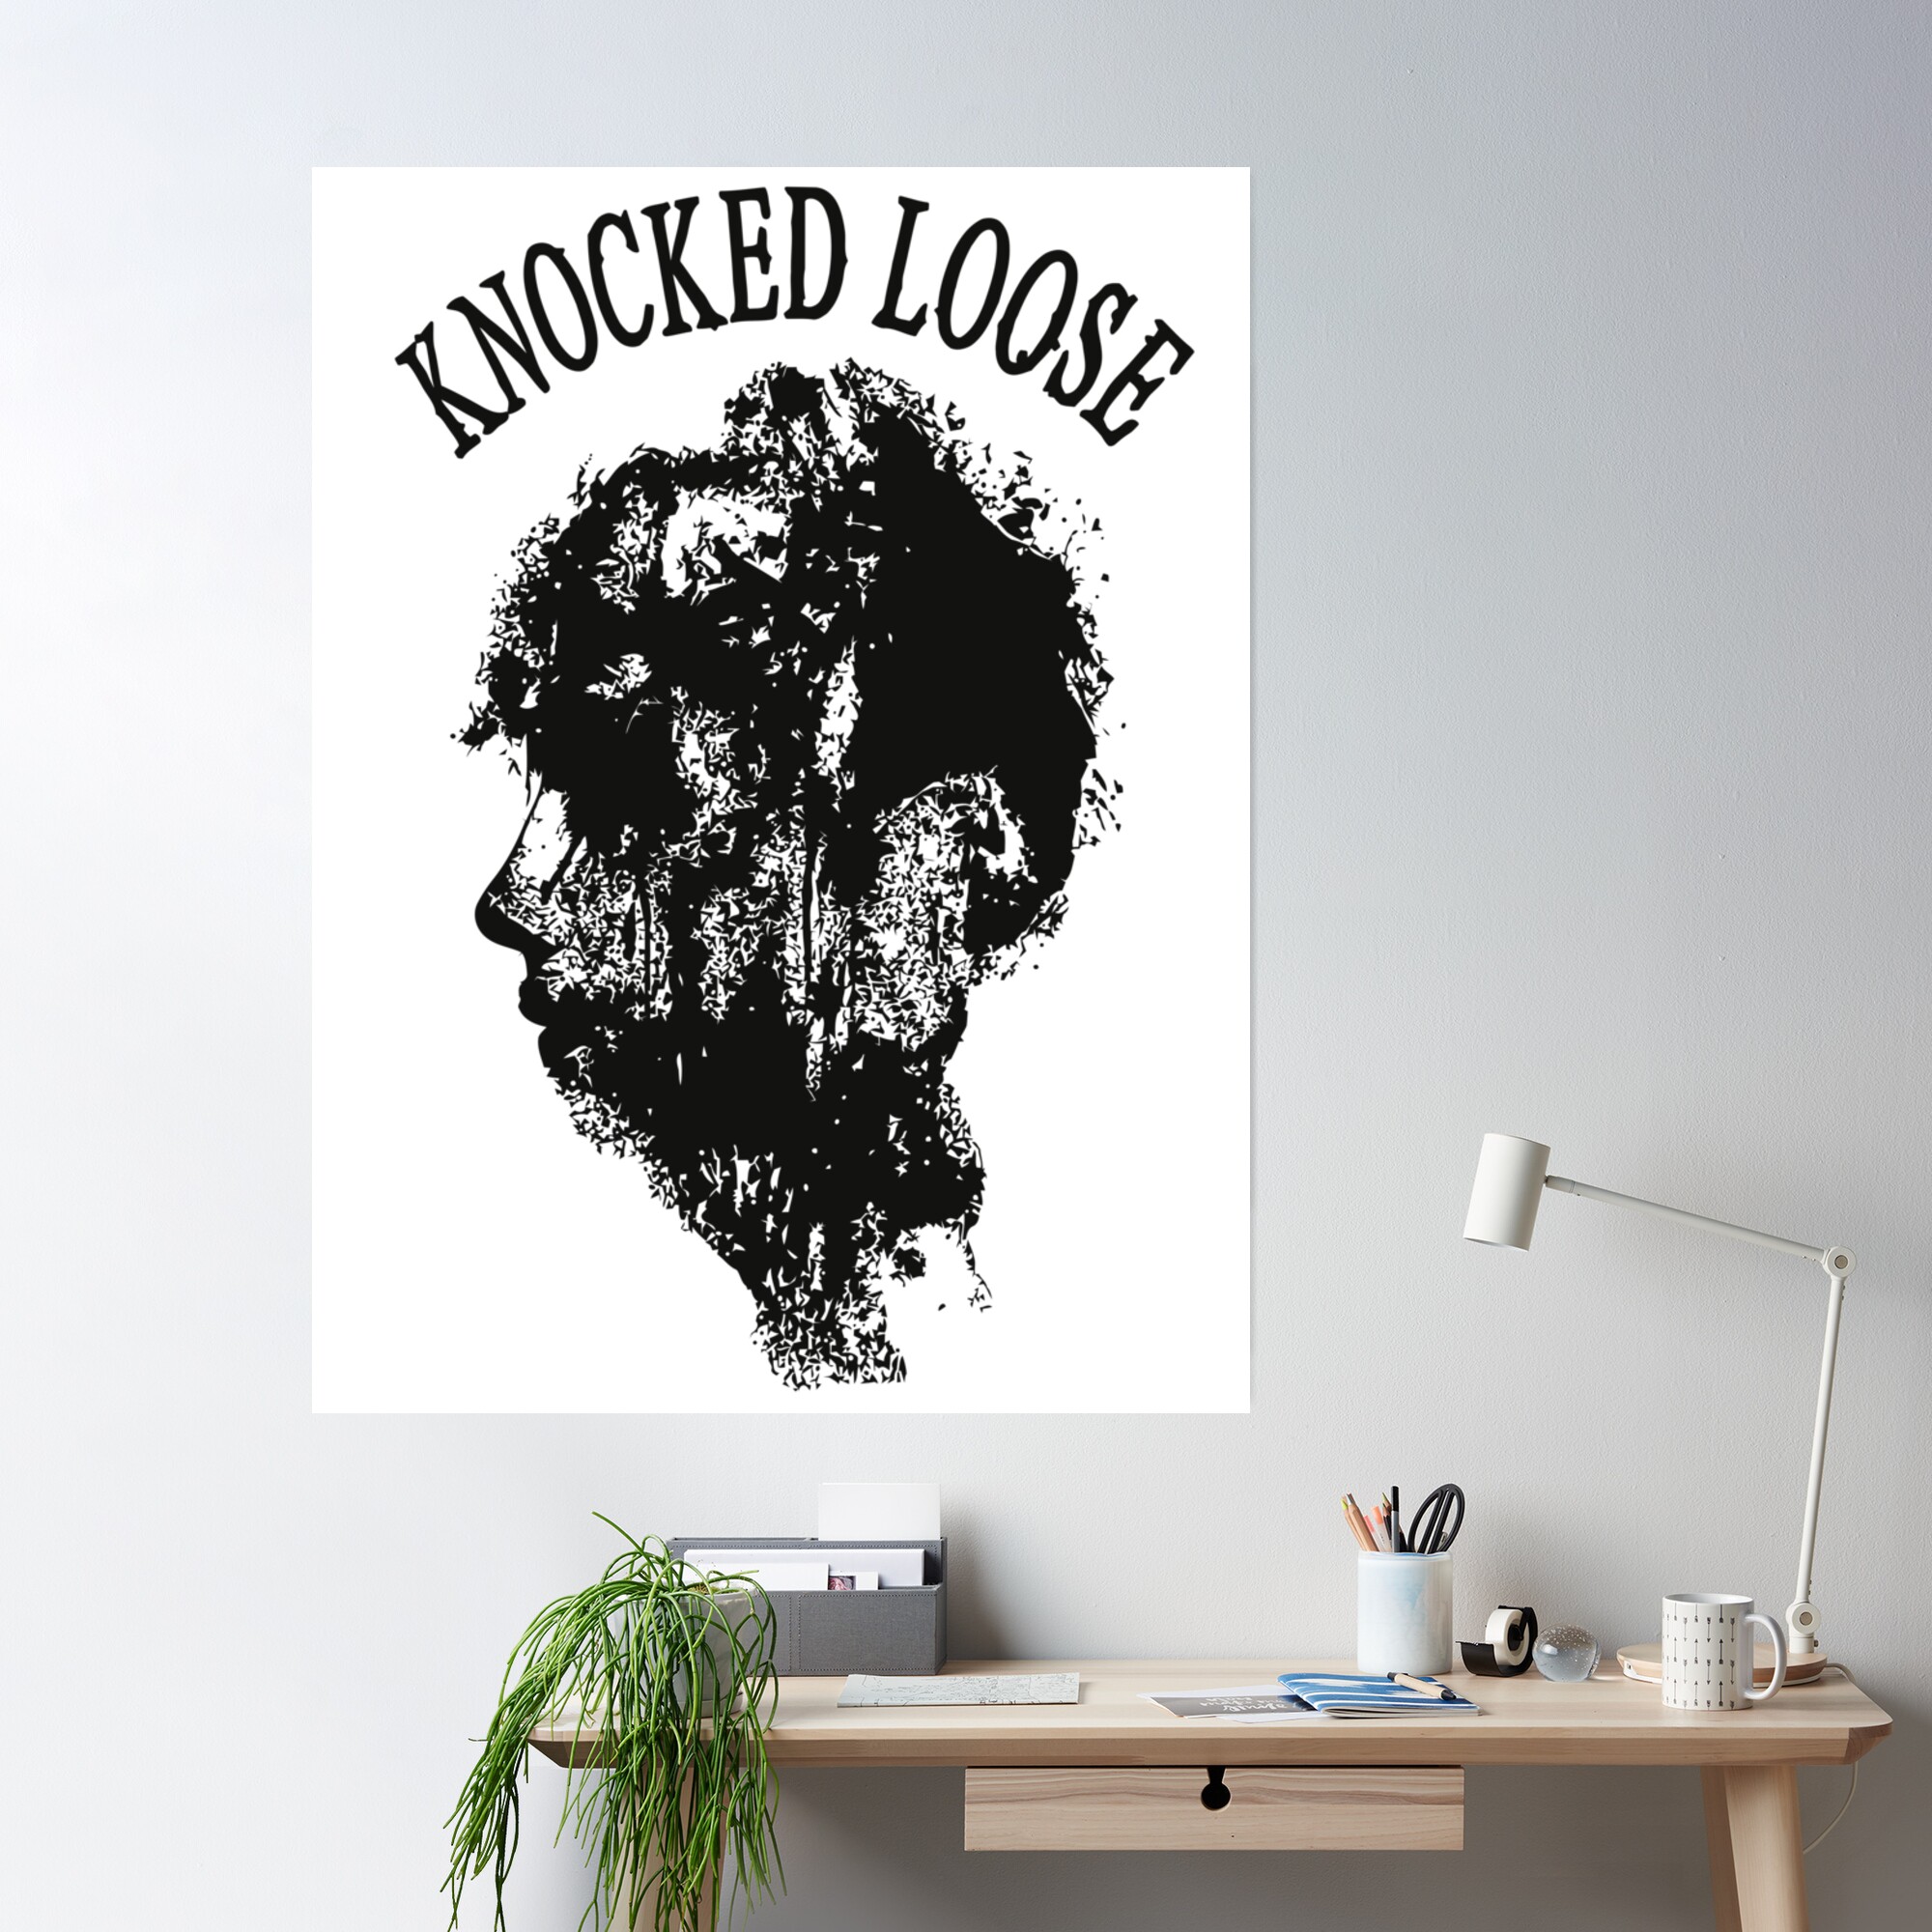 cposterlargesquare product2000x2000 5 - Knocked Loose Shop